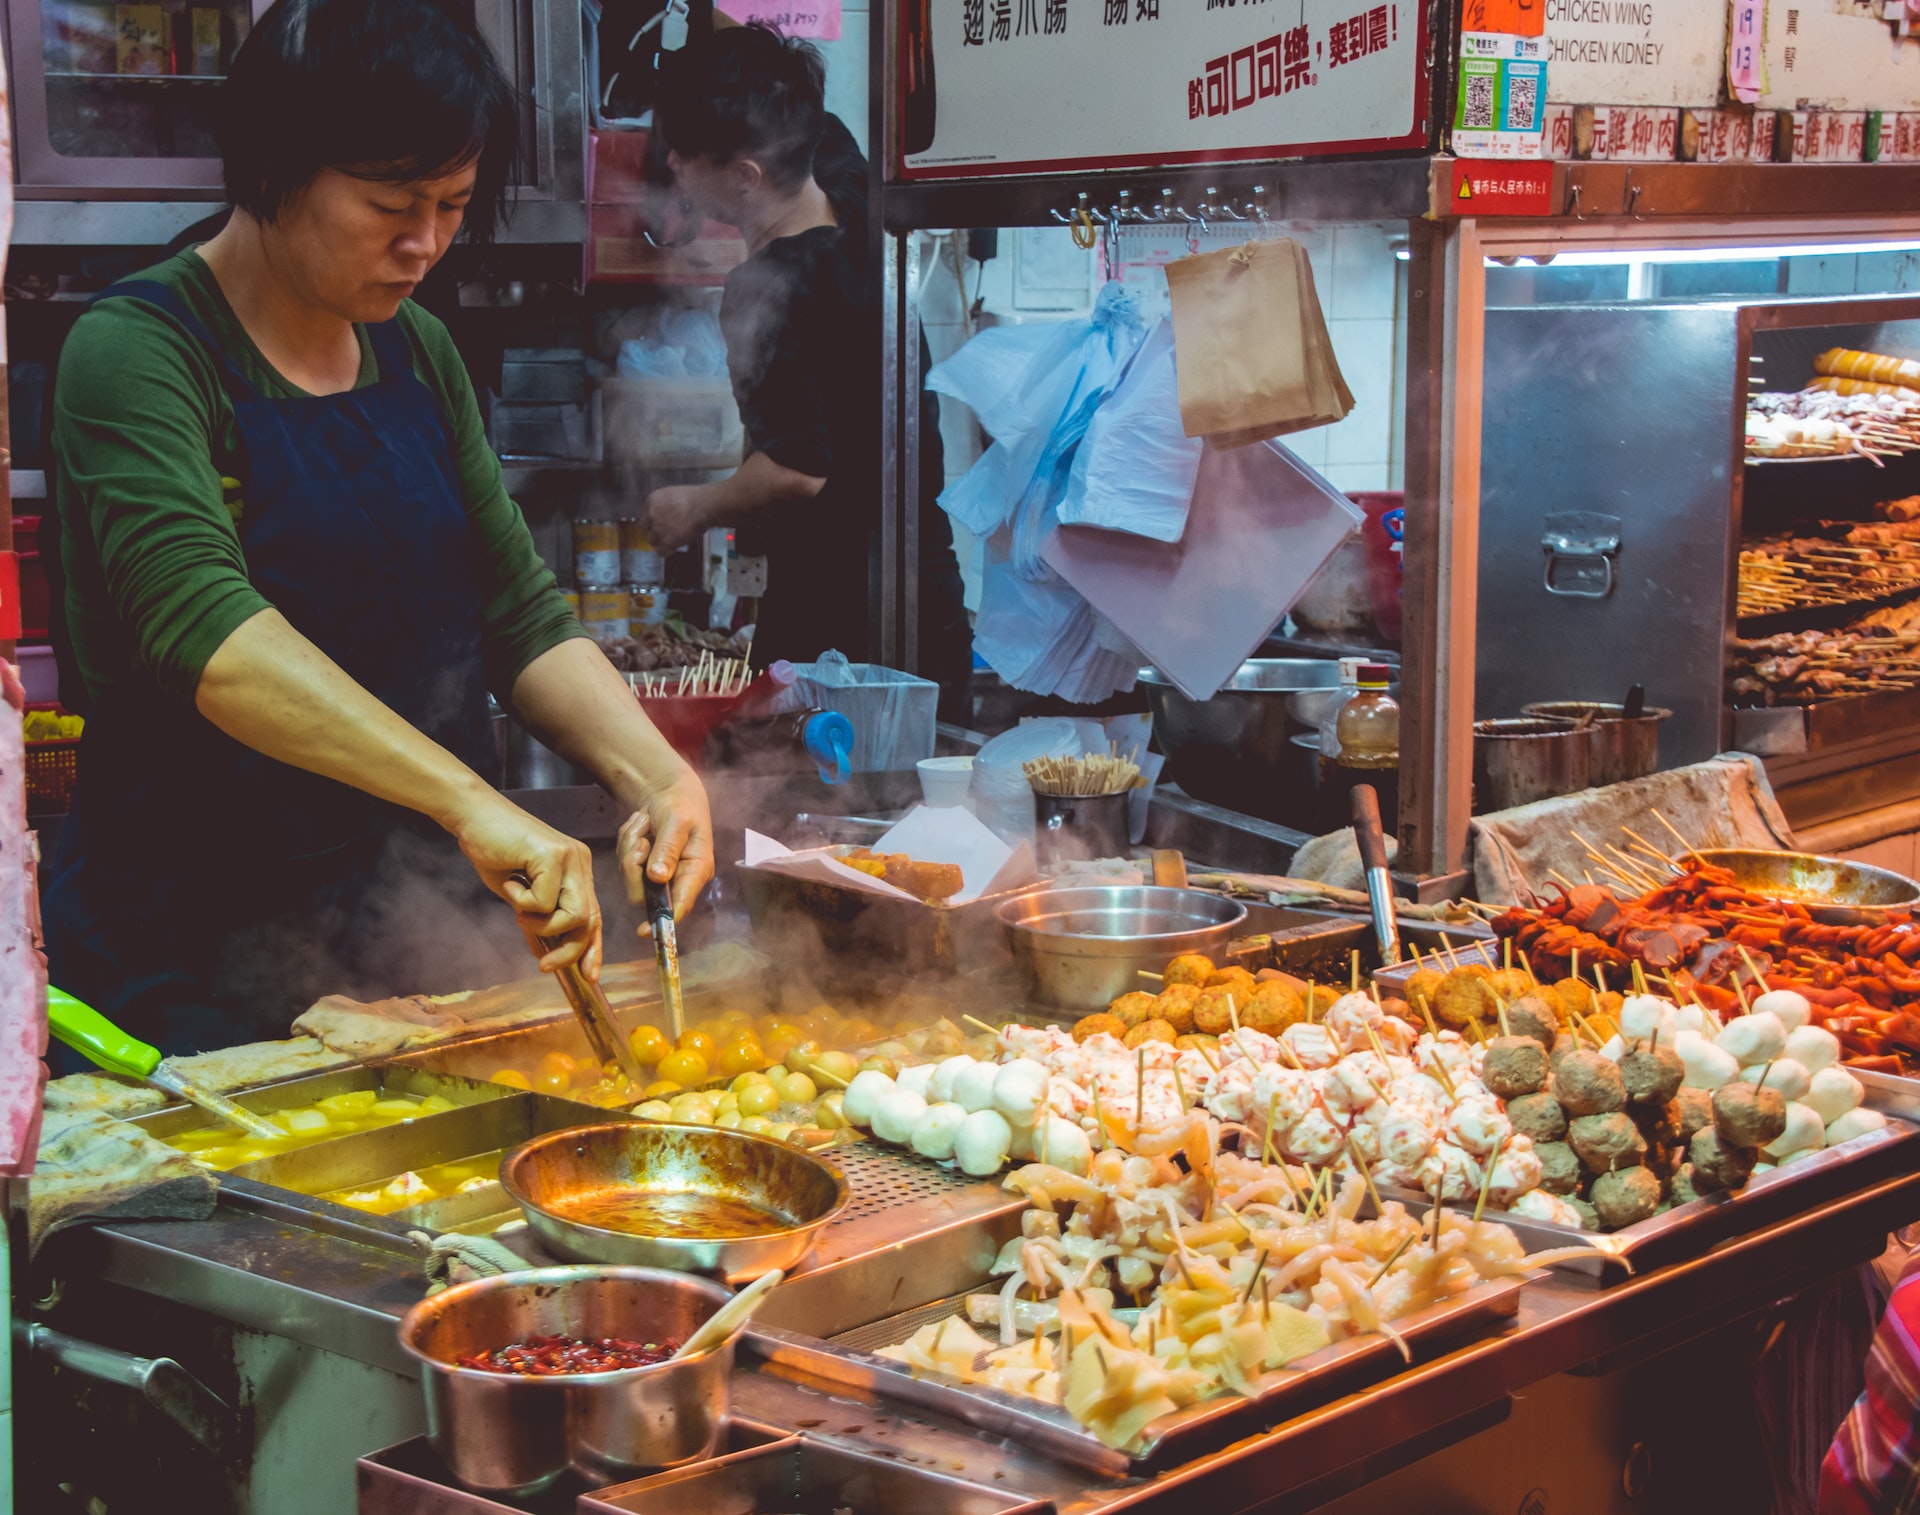 A typical Hong Kong street food stall. Photo by Vernon Raineil Cenzon